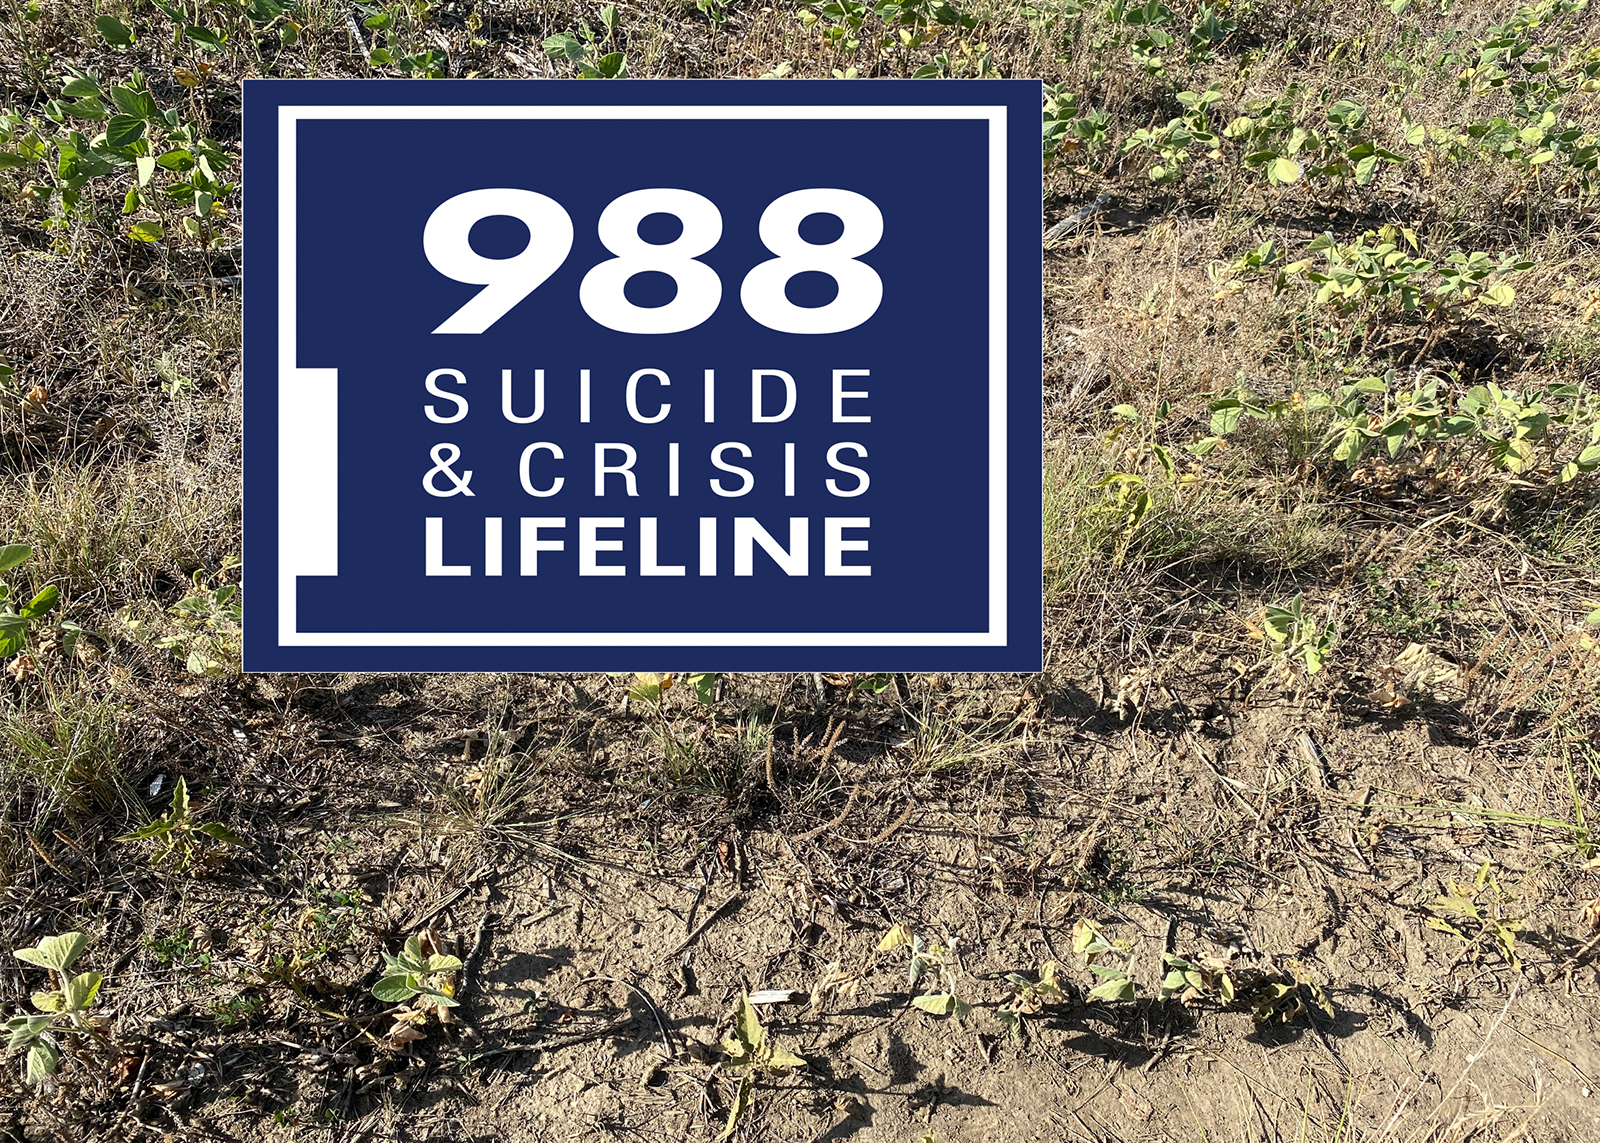 Drought affects more than plants and livestock. September – National Suicide Prevention Month – is a painful reminder that life is tough in rural America, especially after major events such as drought and flood. (Soybean photo by Valerie Tate, University of Missouri Extension.)